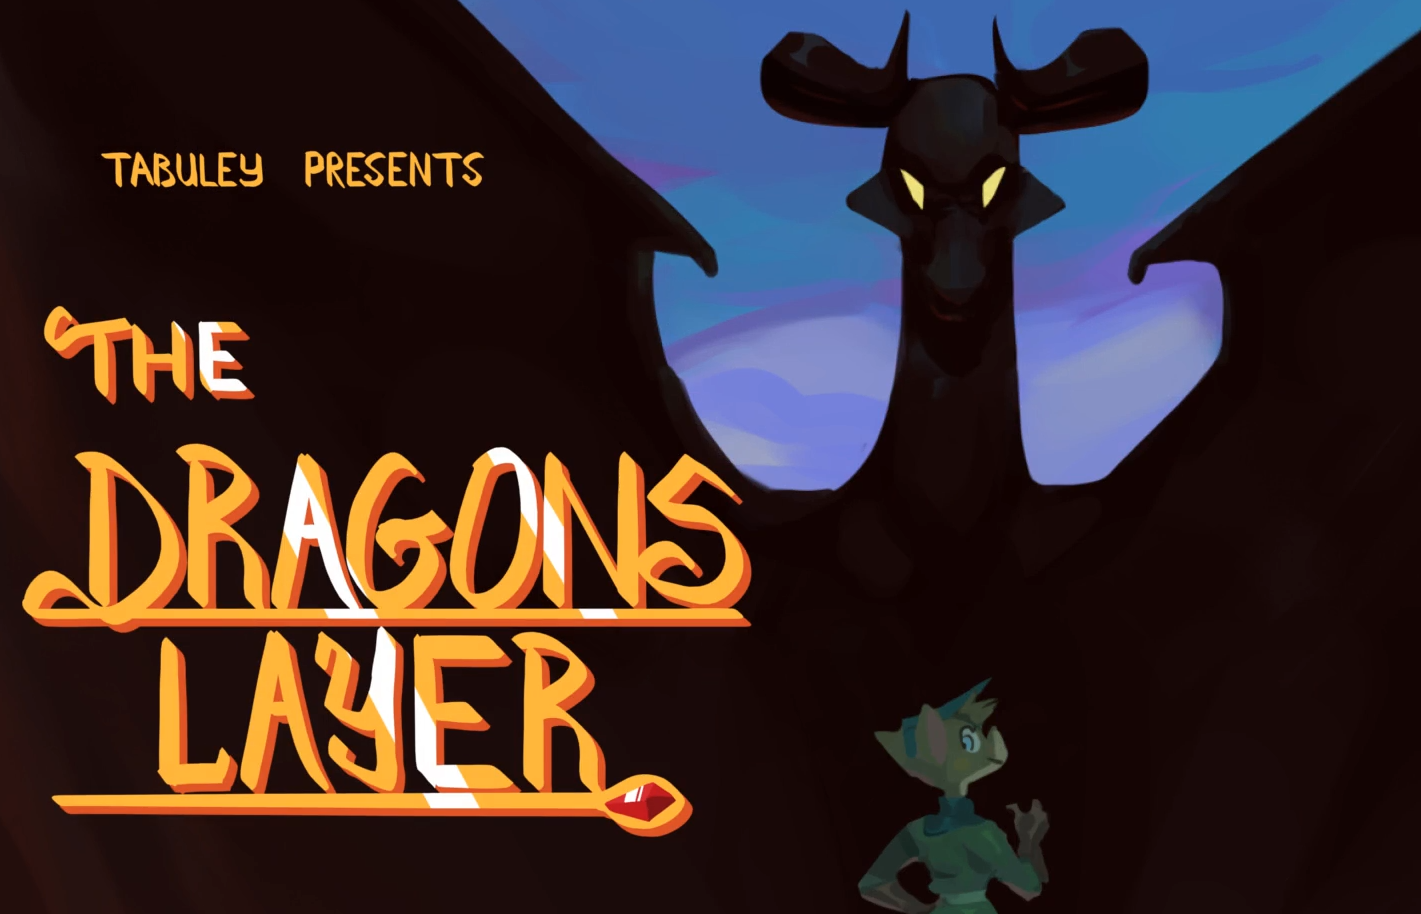 Download "The Dragons Layer" Animation teaser